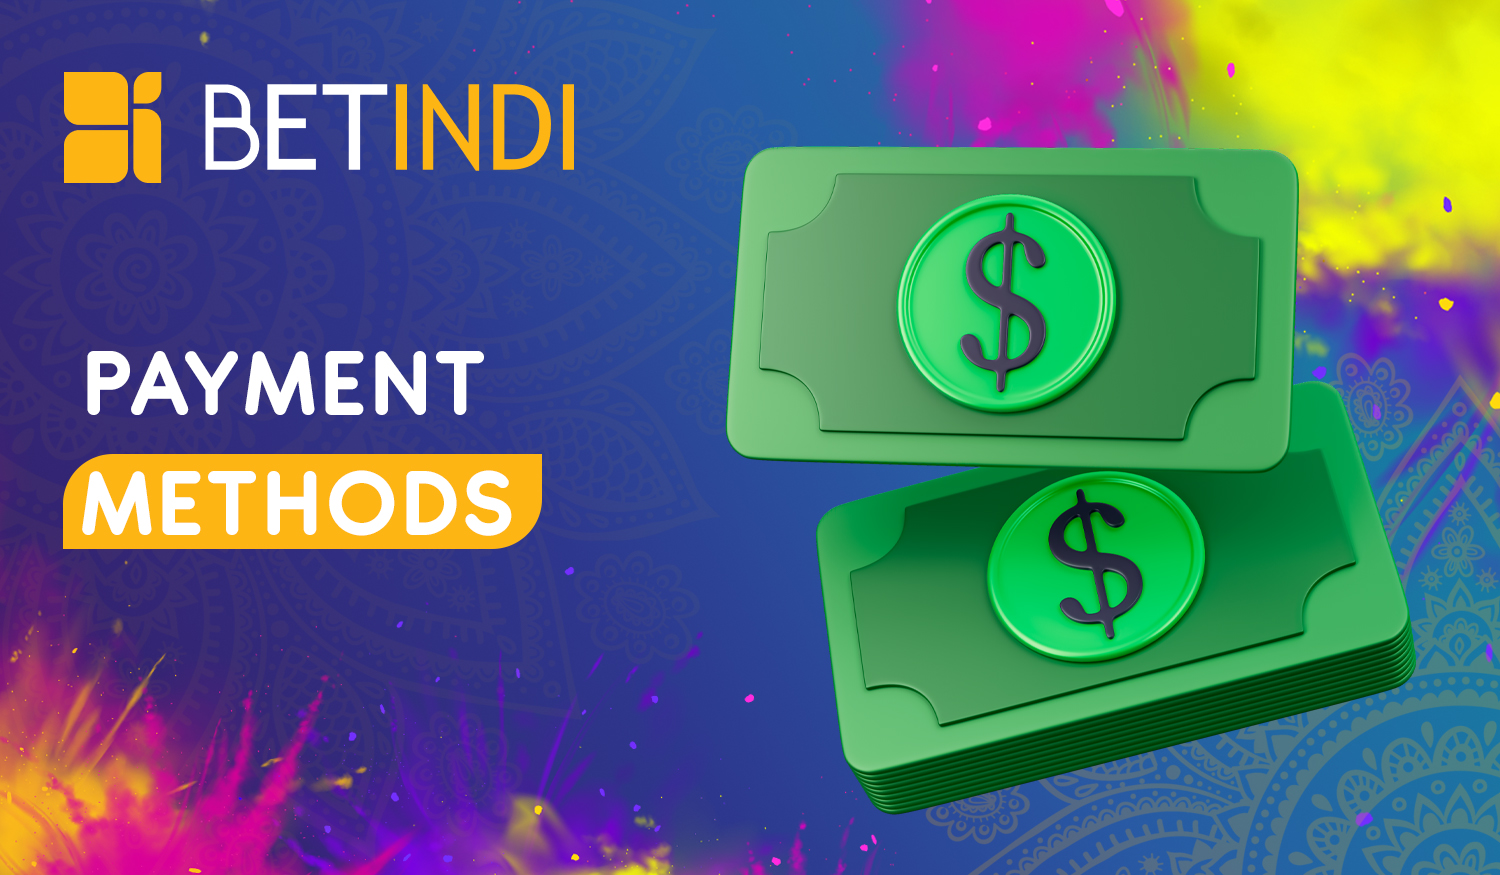 What deposit and withdrawal methods are available to Indian users in the Betindi app 